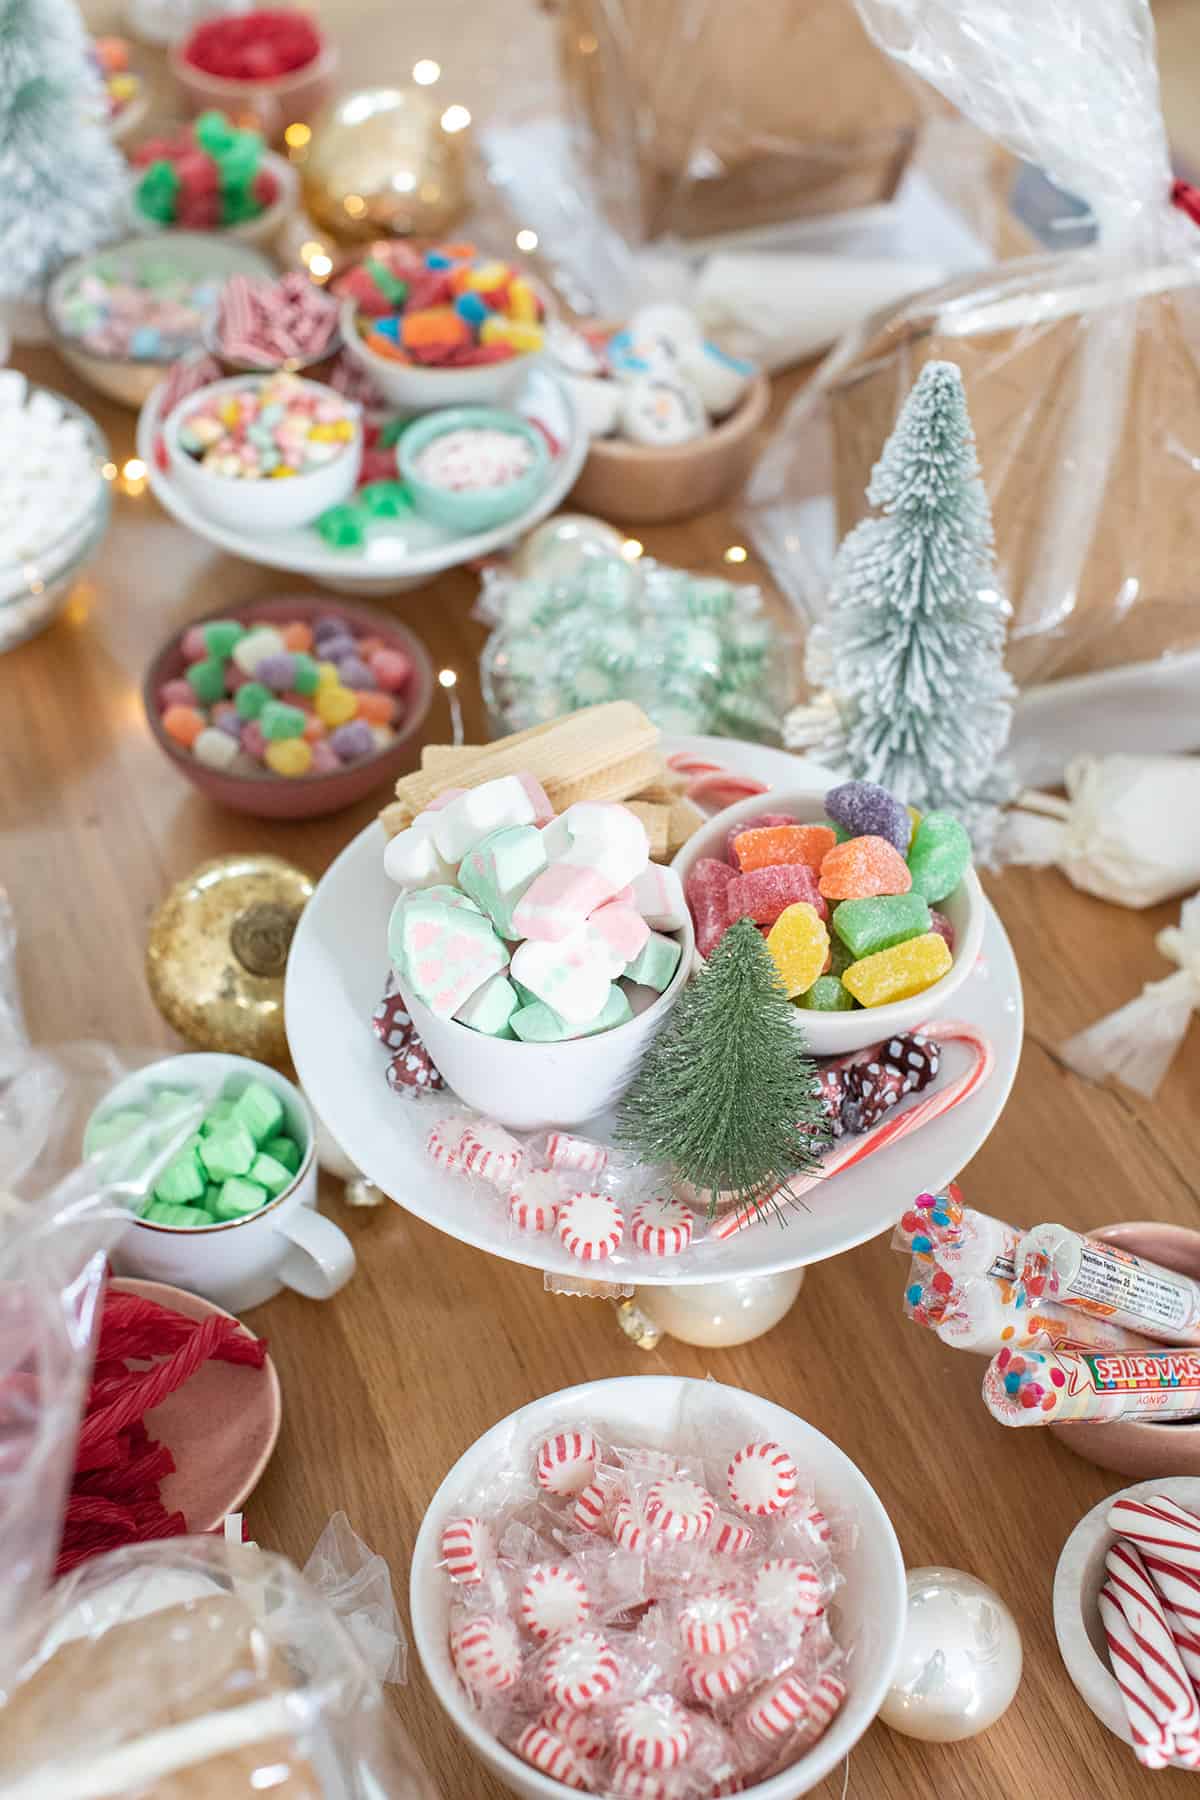 Gingerbread house making party with candy on the table.